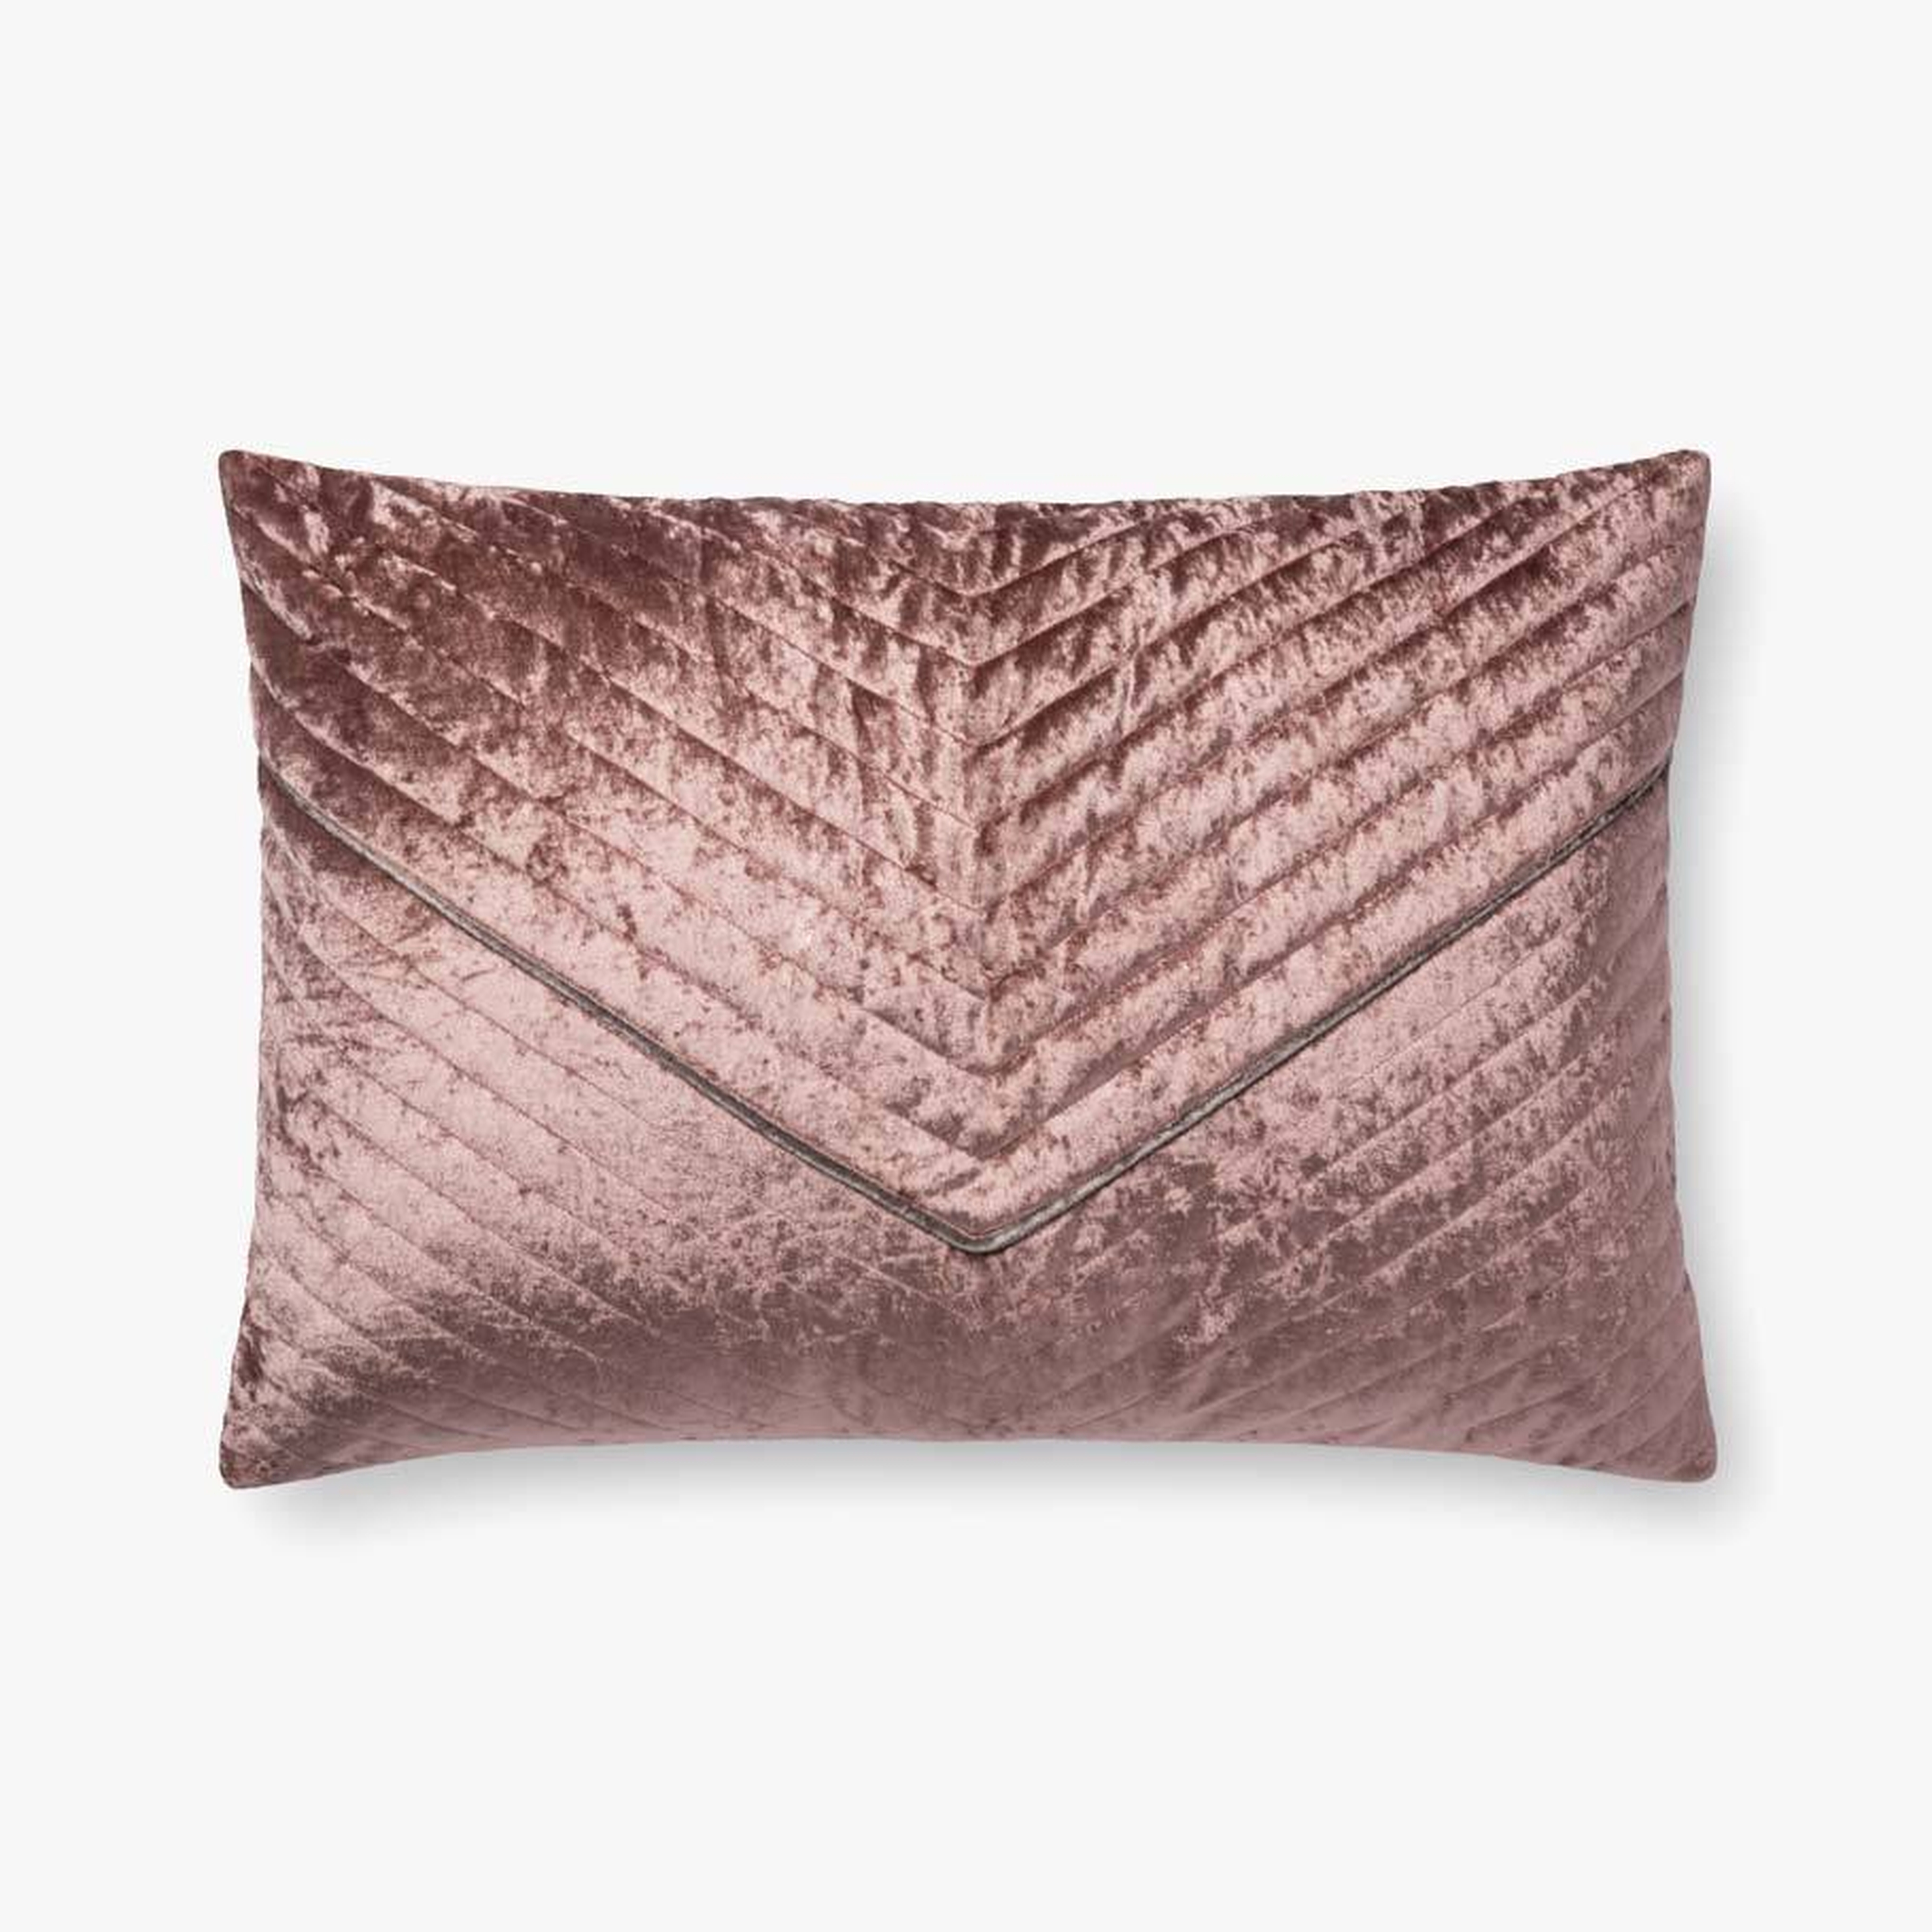 Loloi Pillows P0696 Rose 16" x 26" Cover w/Poly - Loloi Rugs